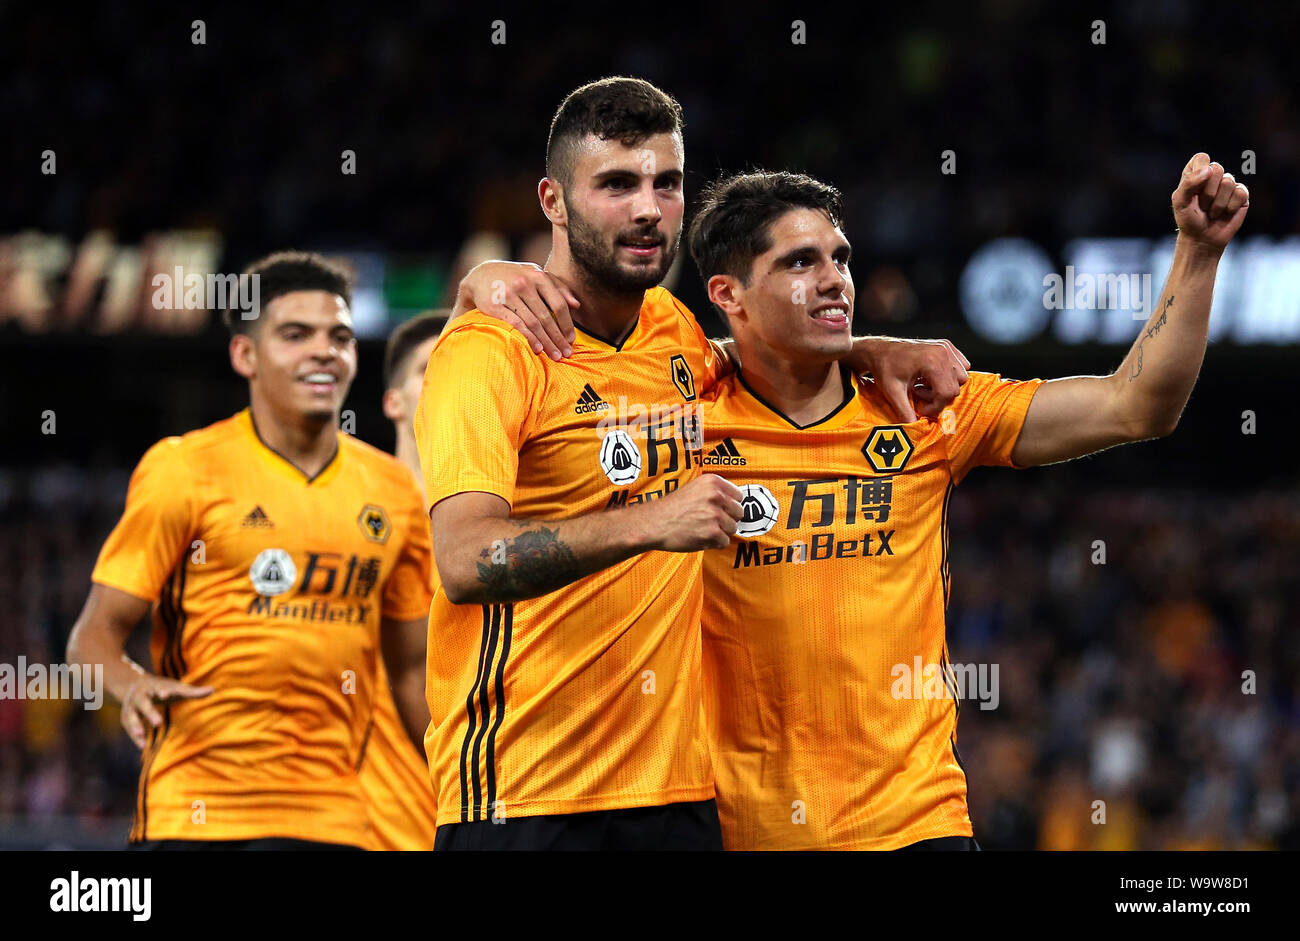 Wolverhampton Wanderers' Lomba Pedro Neto (right) celebrates scoring his side's first goal of the game with teammate Patrick Cutrone during the UEFA Europa League Third Qualifying Round Second Leg match at Molineux Stadium, Wolverhampton. Stock Photo